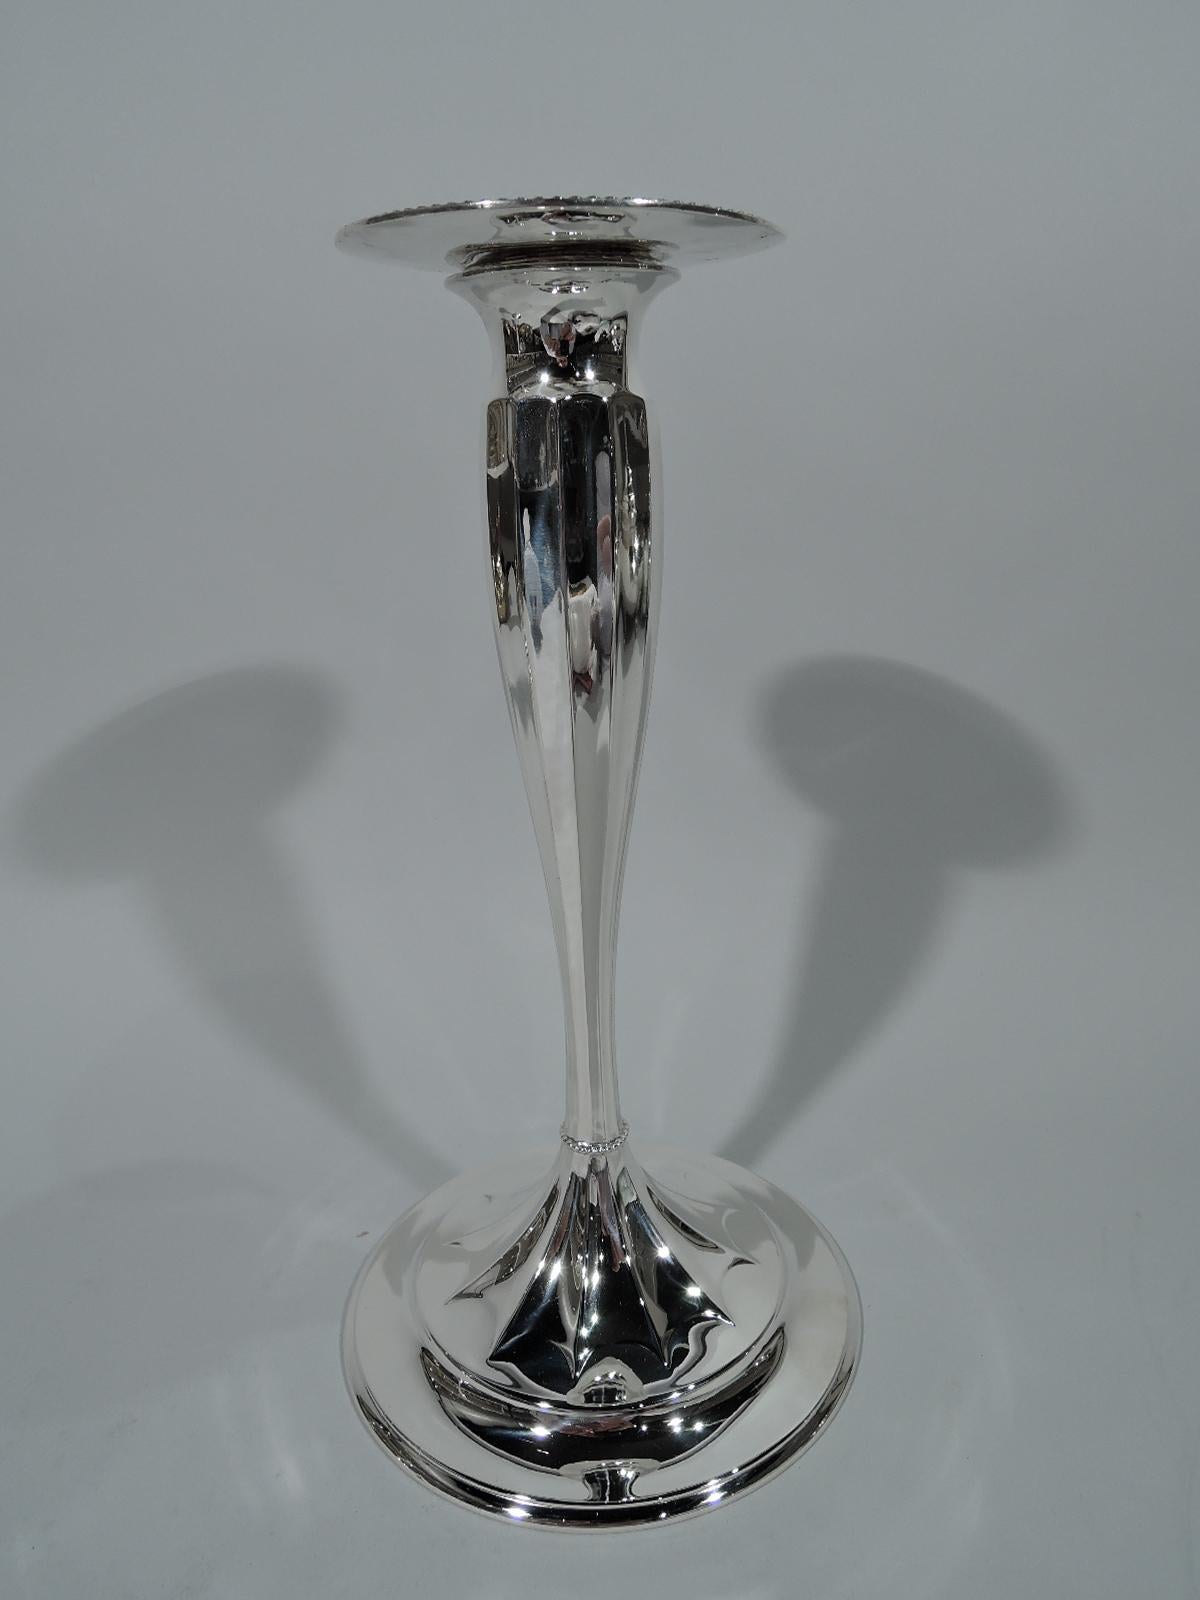 Pair of sterling silver candlesticks. Made by Tiffany & Co. in New York. Each: Fluted tapering shaft terminating in raised and fluted star on round and raised foot. Beaded knop at base. Detachable bobeche same. Hallmark includes pattern no. 12221